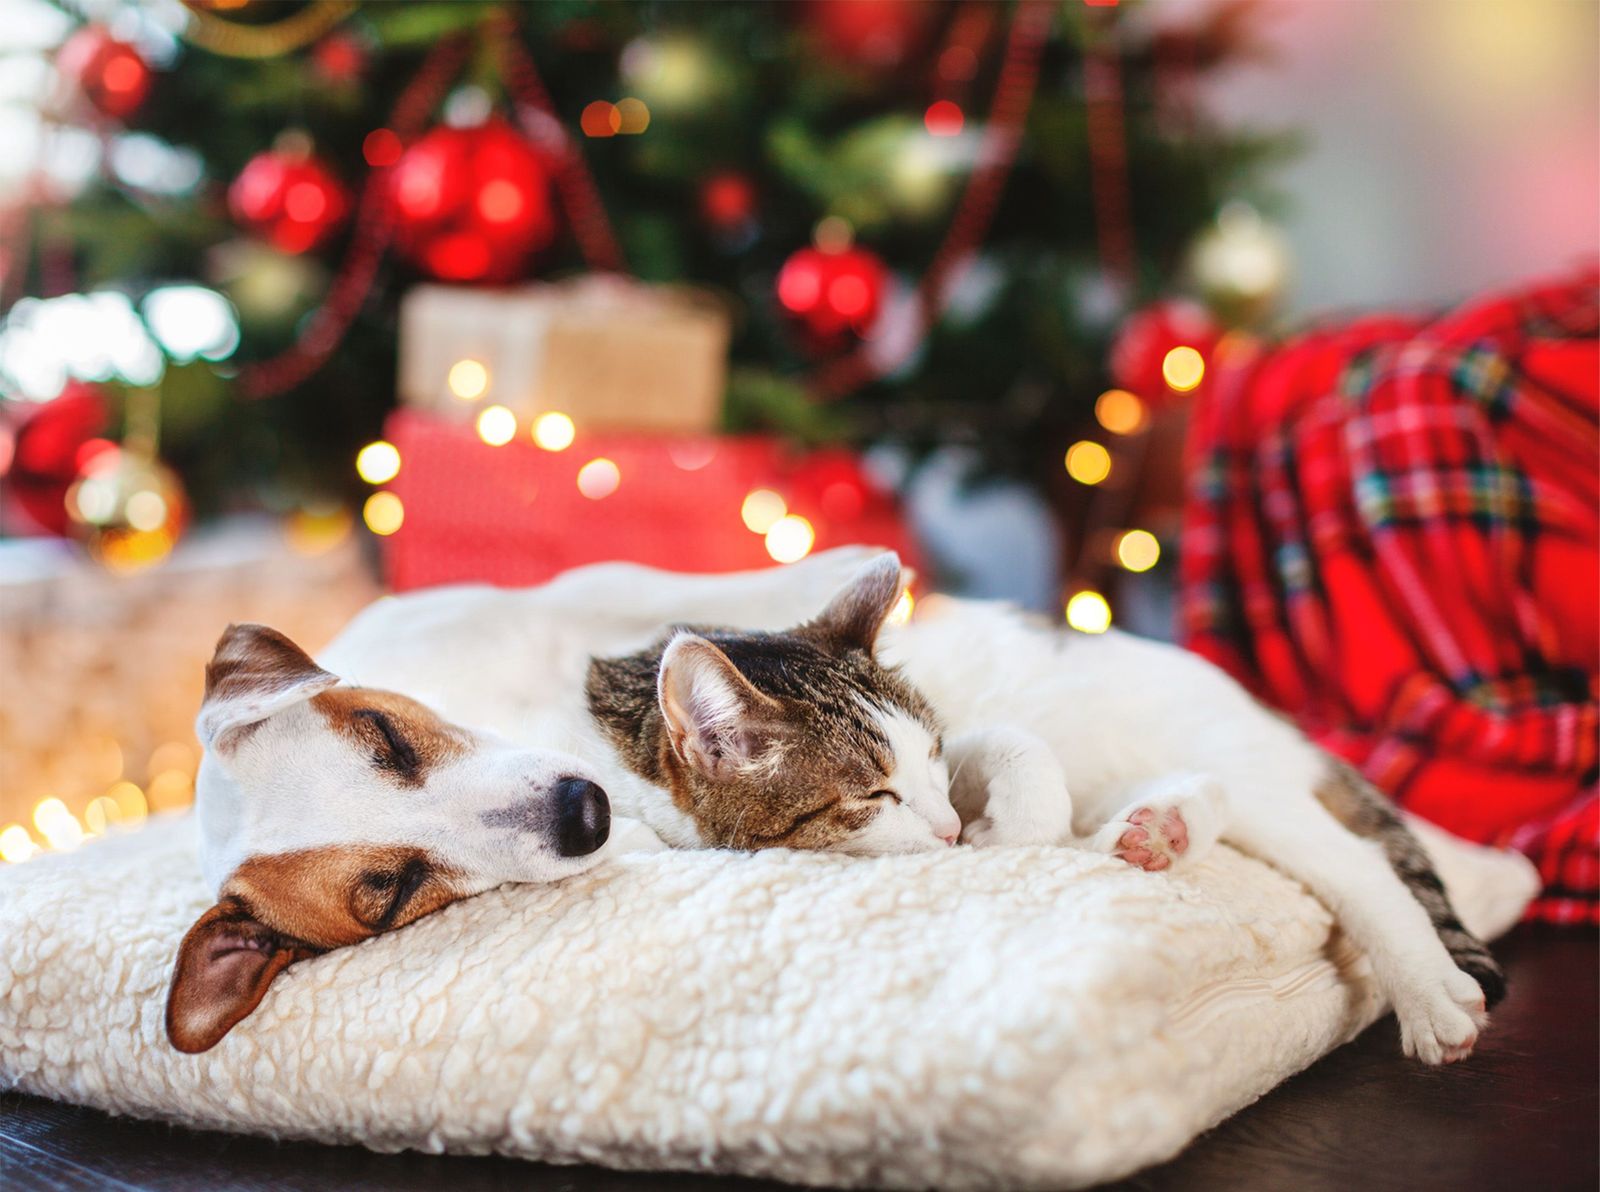 Your pet’s health and medications during the holidays - A dog and cat sleeping by a festive blanket